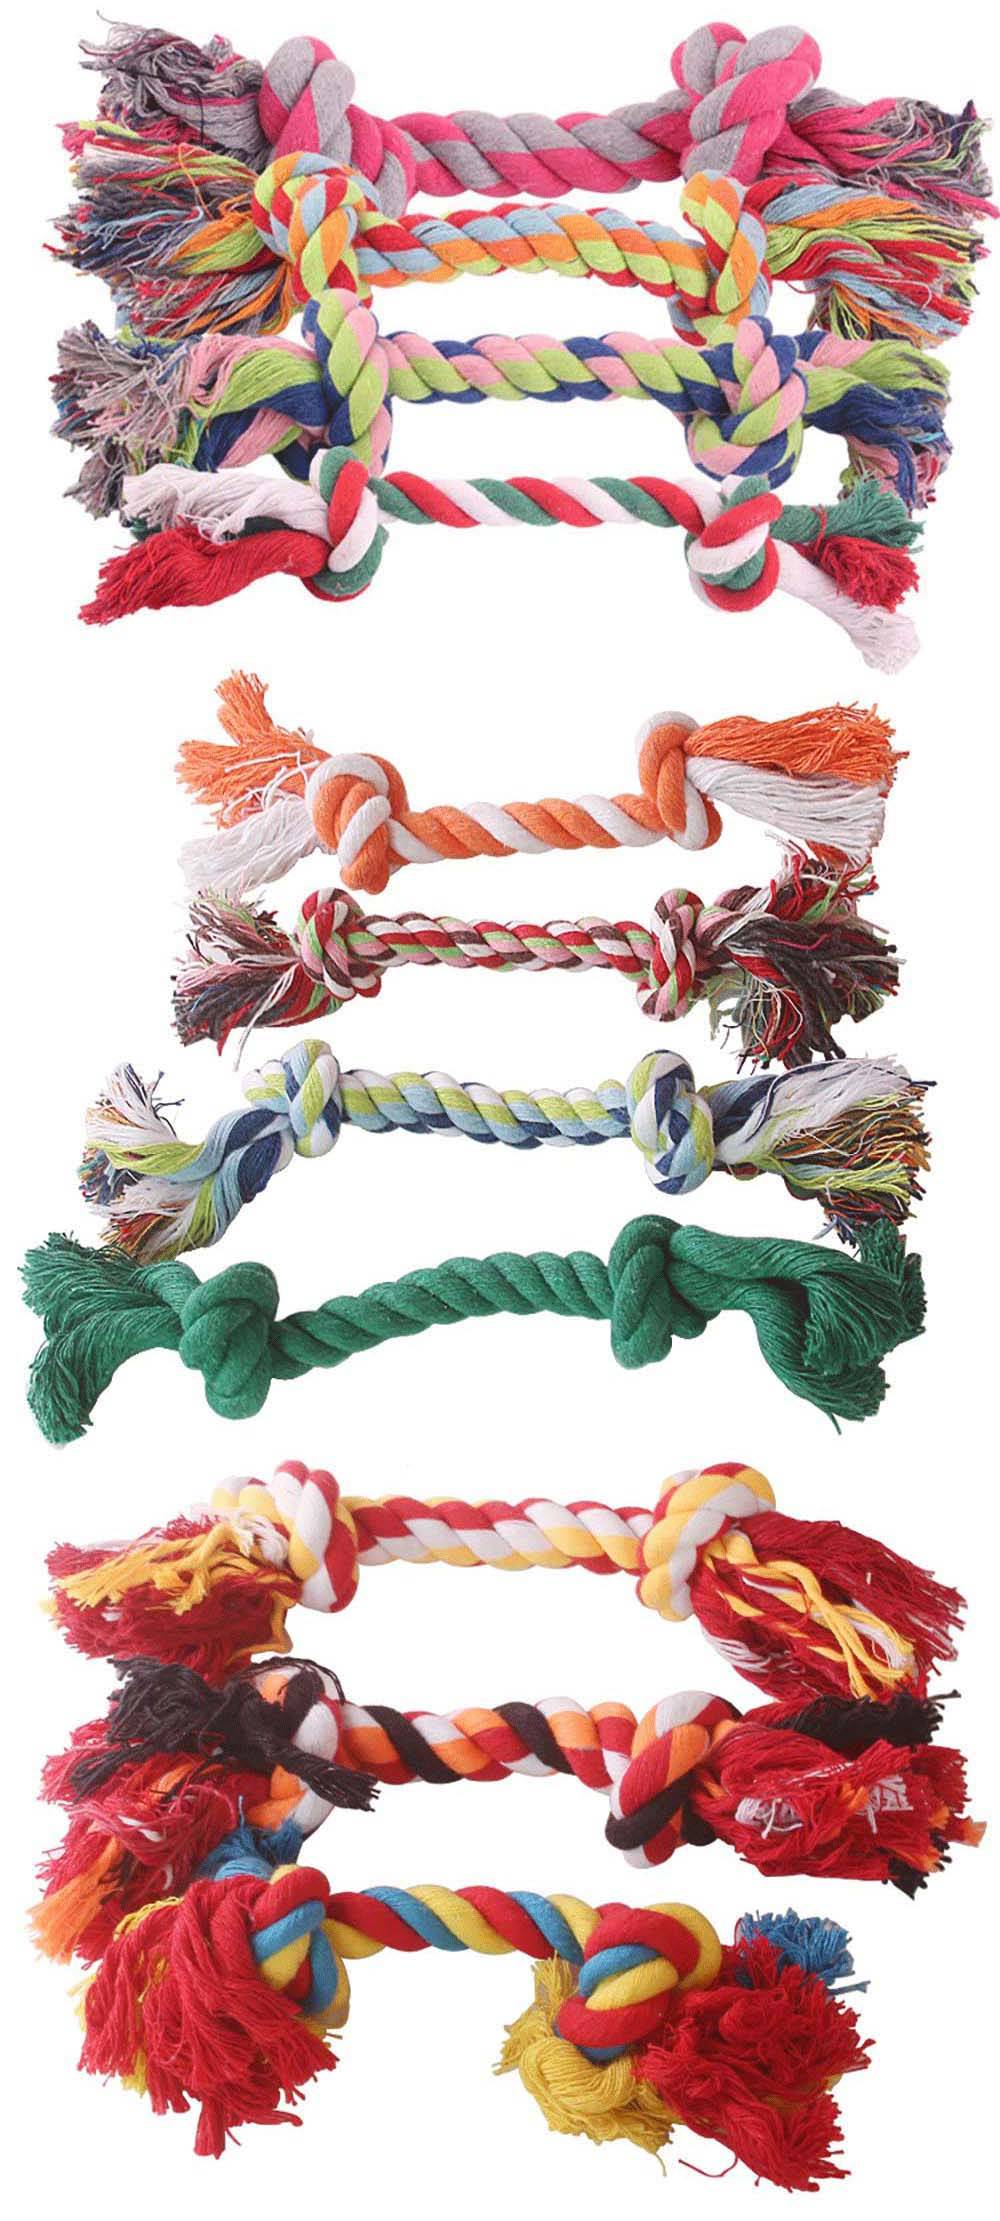 Colorful Cotton Dog Rope Toy